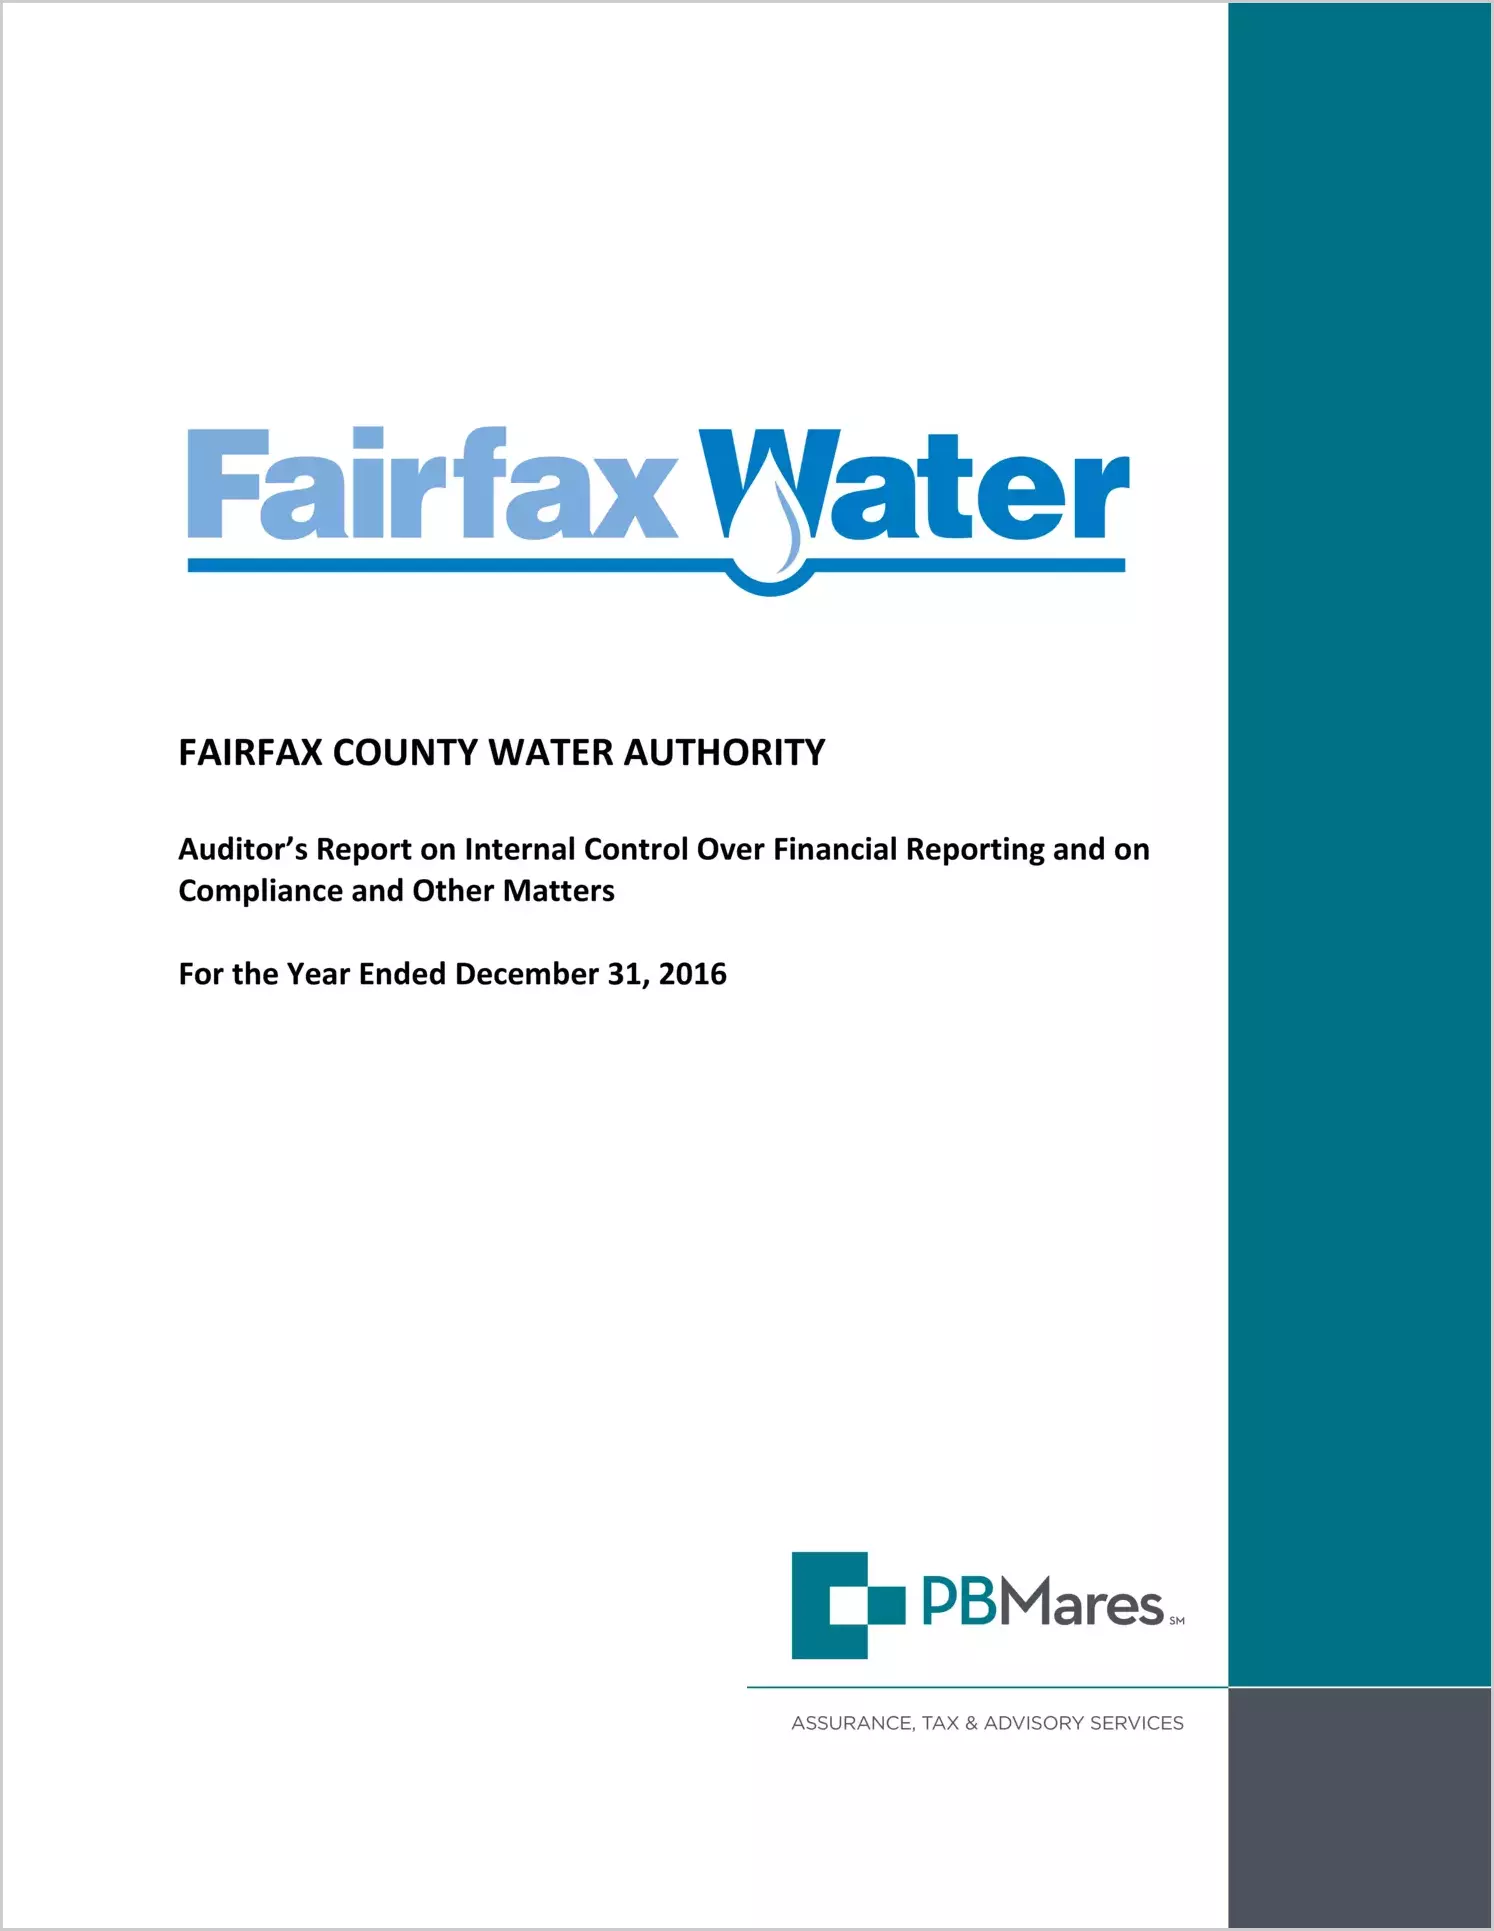 2016 ABC/Other Internal Control and Compliance Report for Fairfax County Water Authority